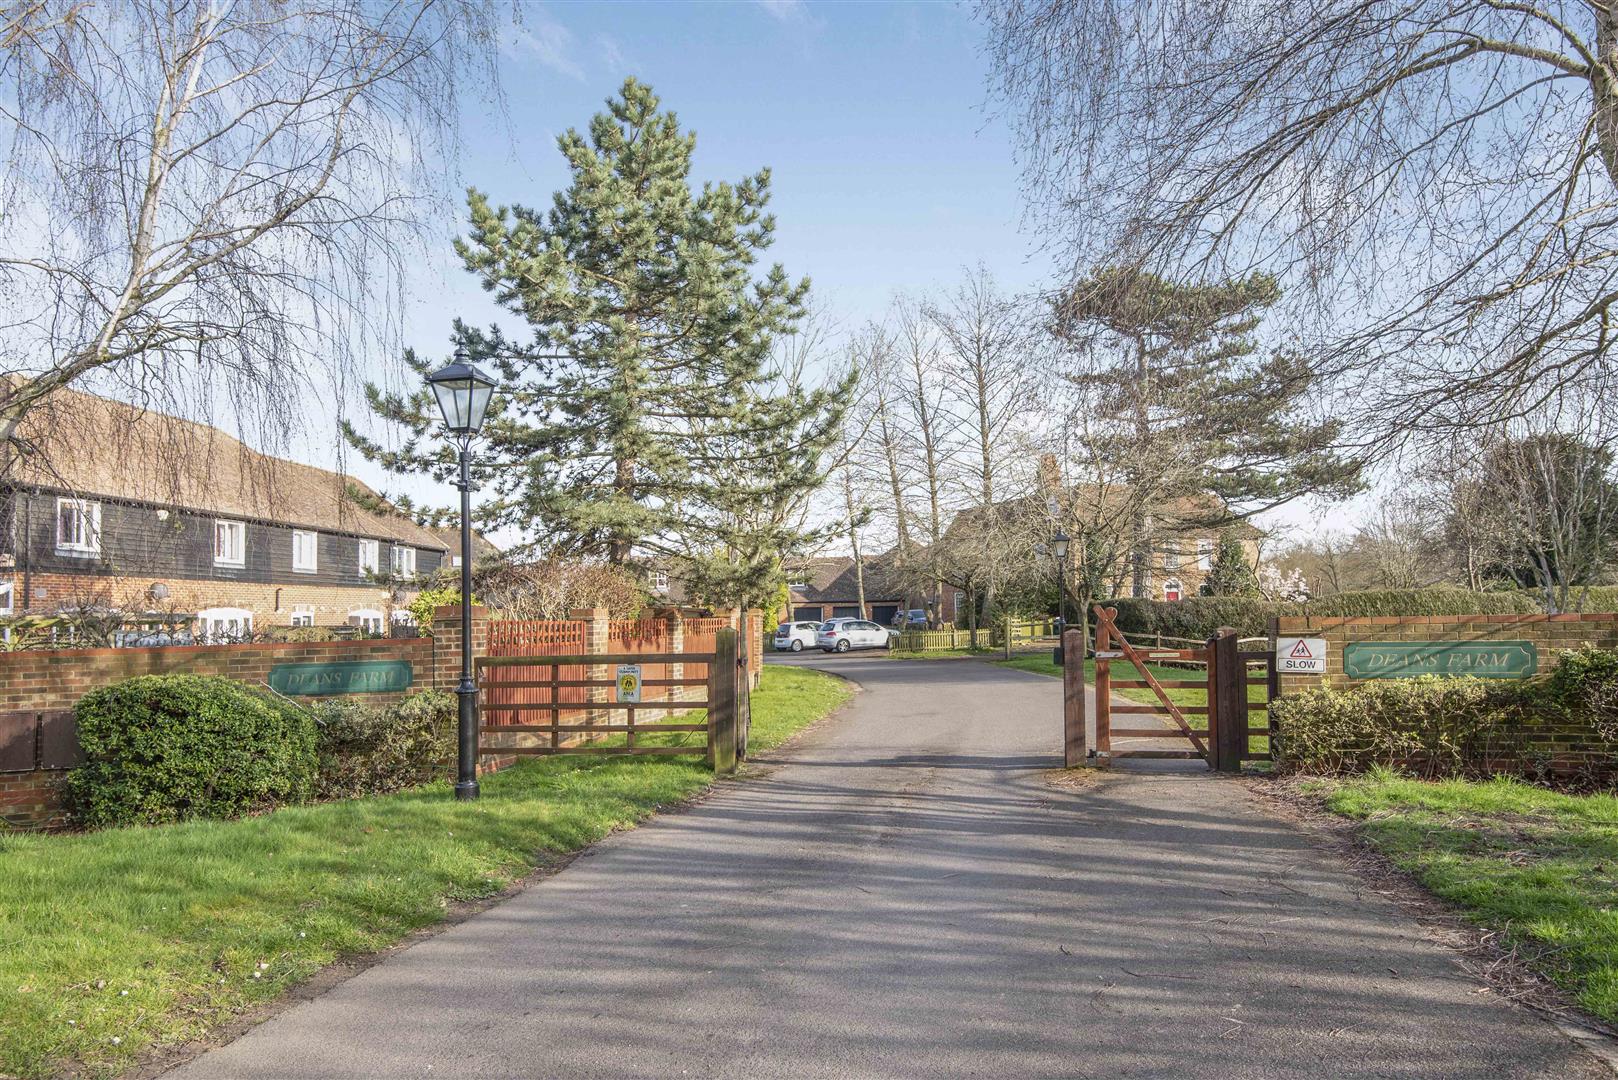 The Causeway Caversham house for sale in Reading